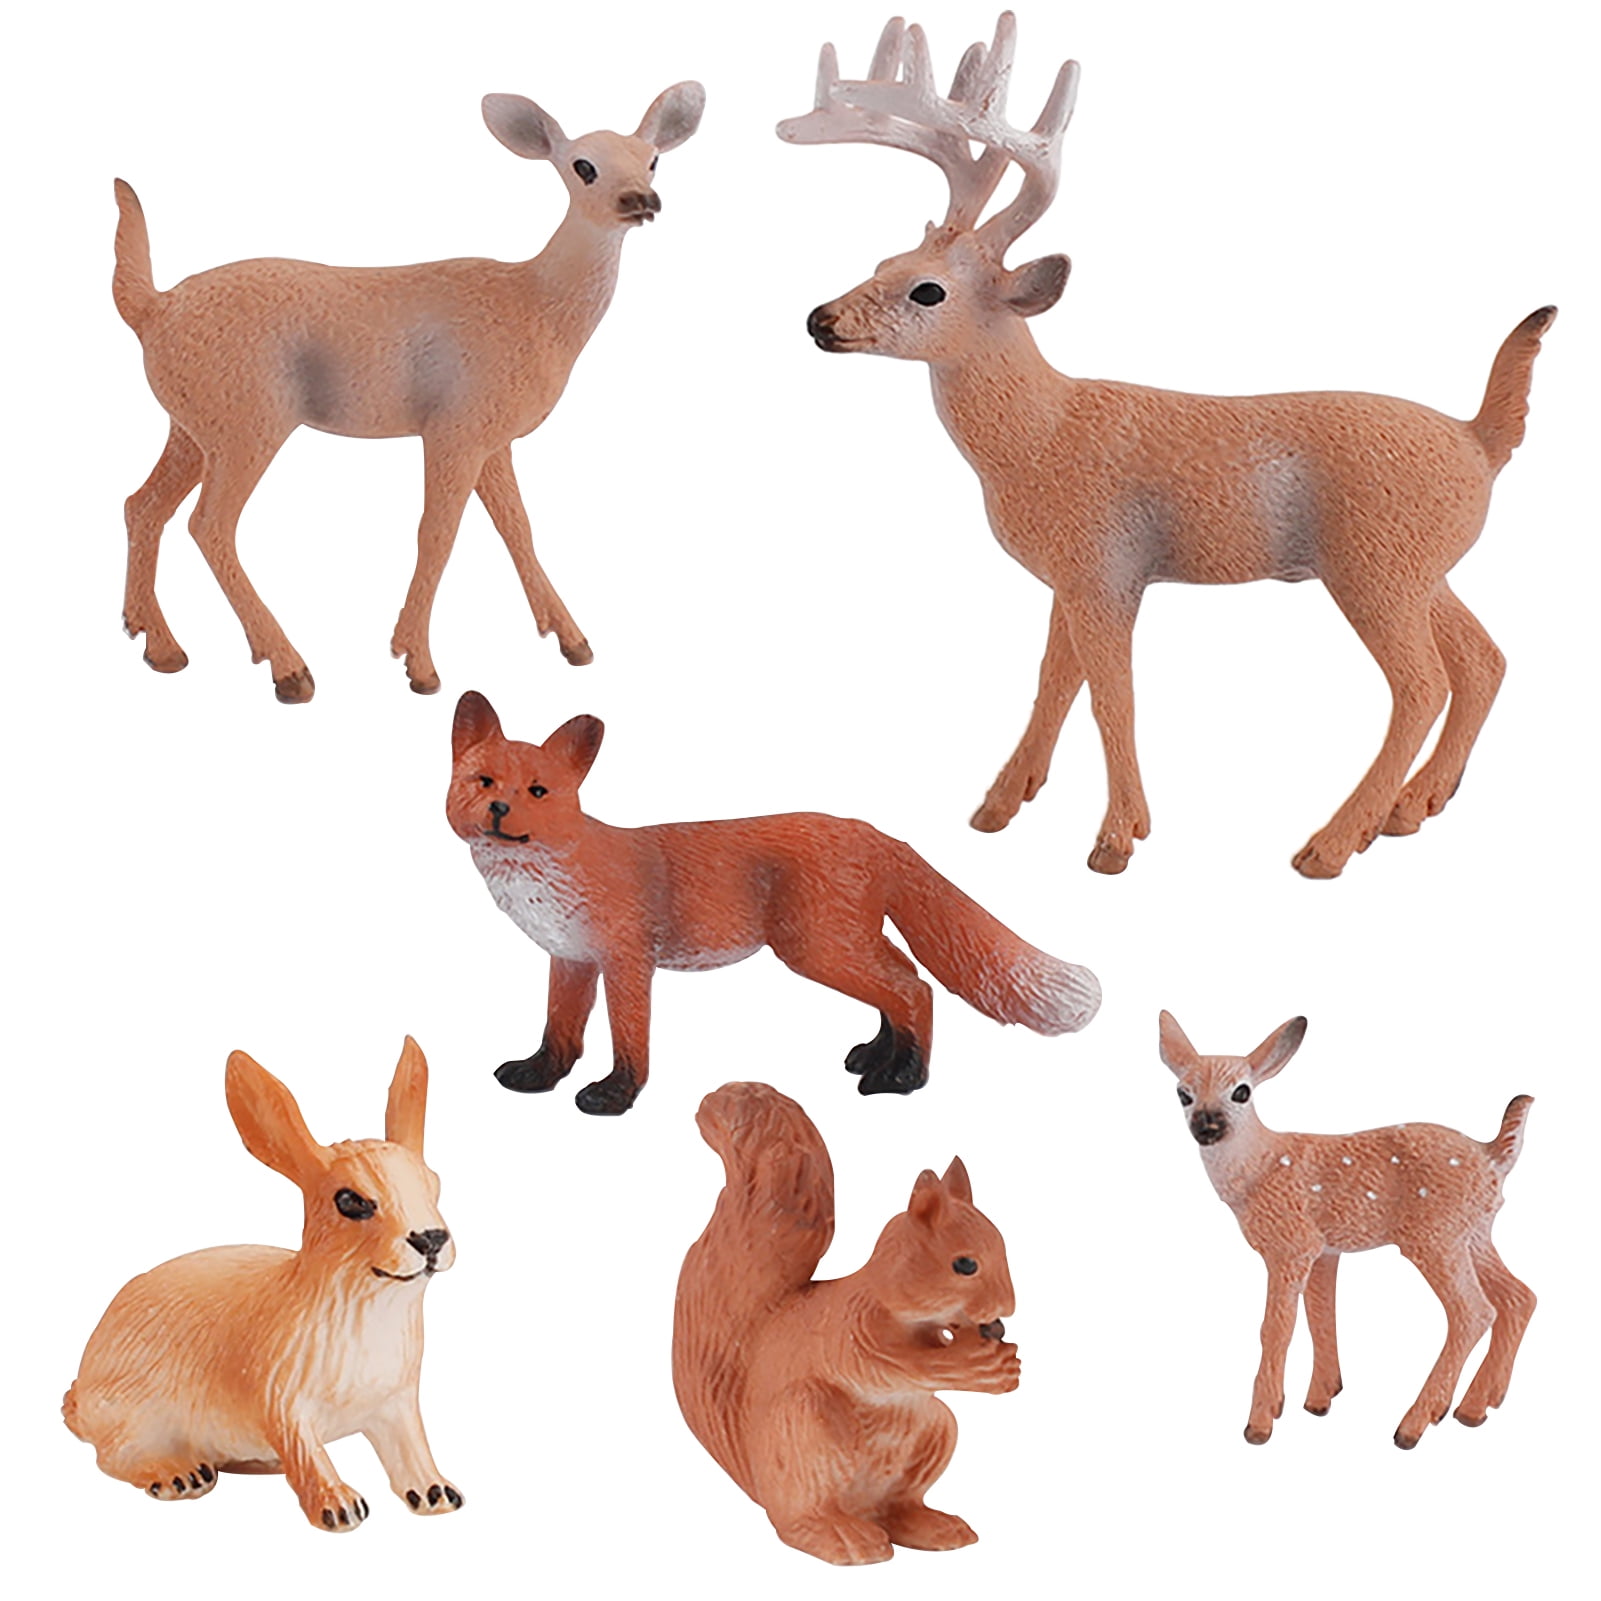 6PCS North American Animal Realistic Whitetail Deer Family Set Figurines 2-5 Safari Animals Figures Include 1 Fox 1 Squirrel,Educational Toy Cake Toppers Christmas Birthday Gift for Kids Toddlers 